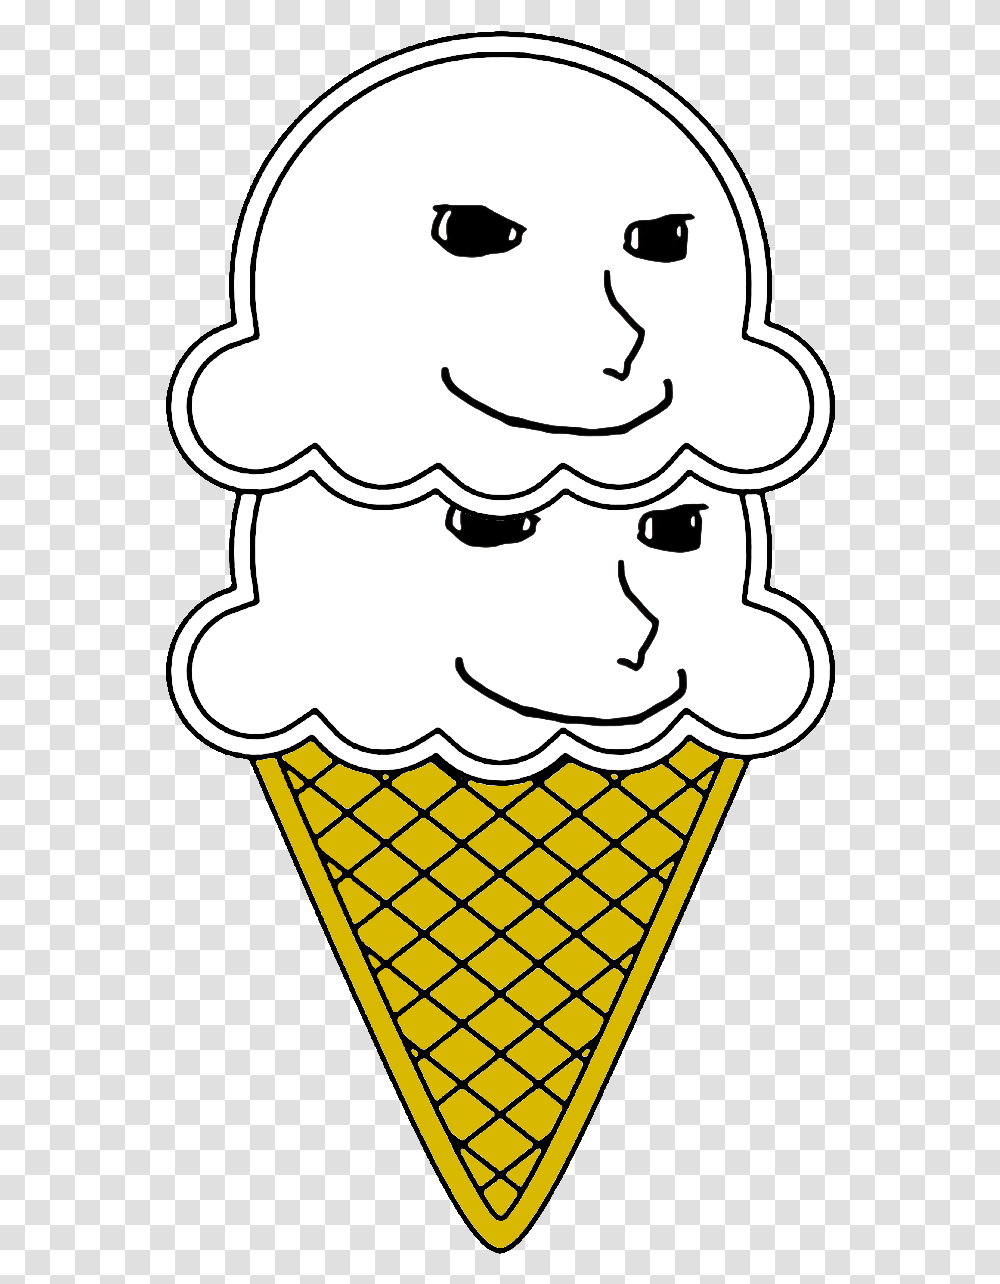 Food Amp Cooking Ice Cream Cone Outline 2 Scoops, Dessert, Creme, Snowman, Winter Transparent Png